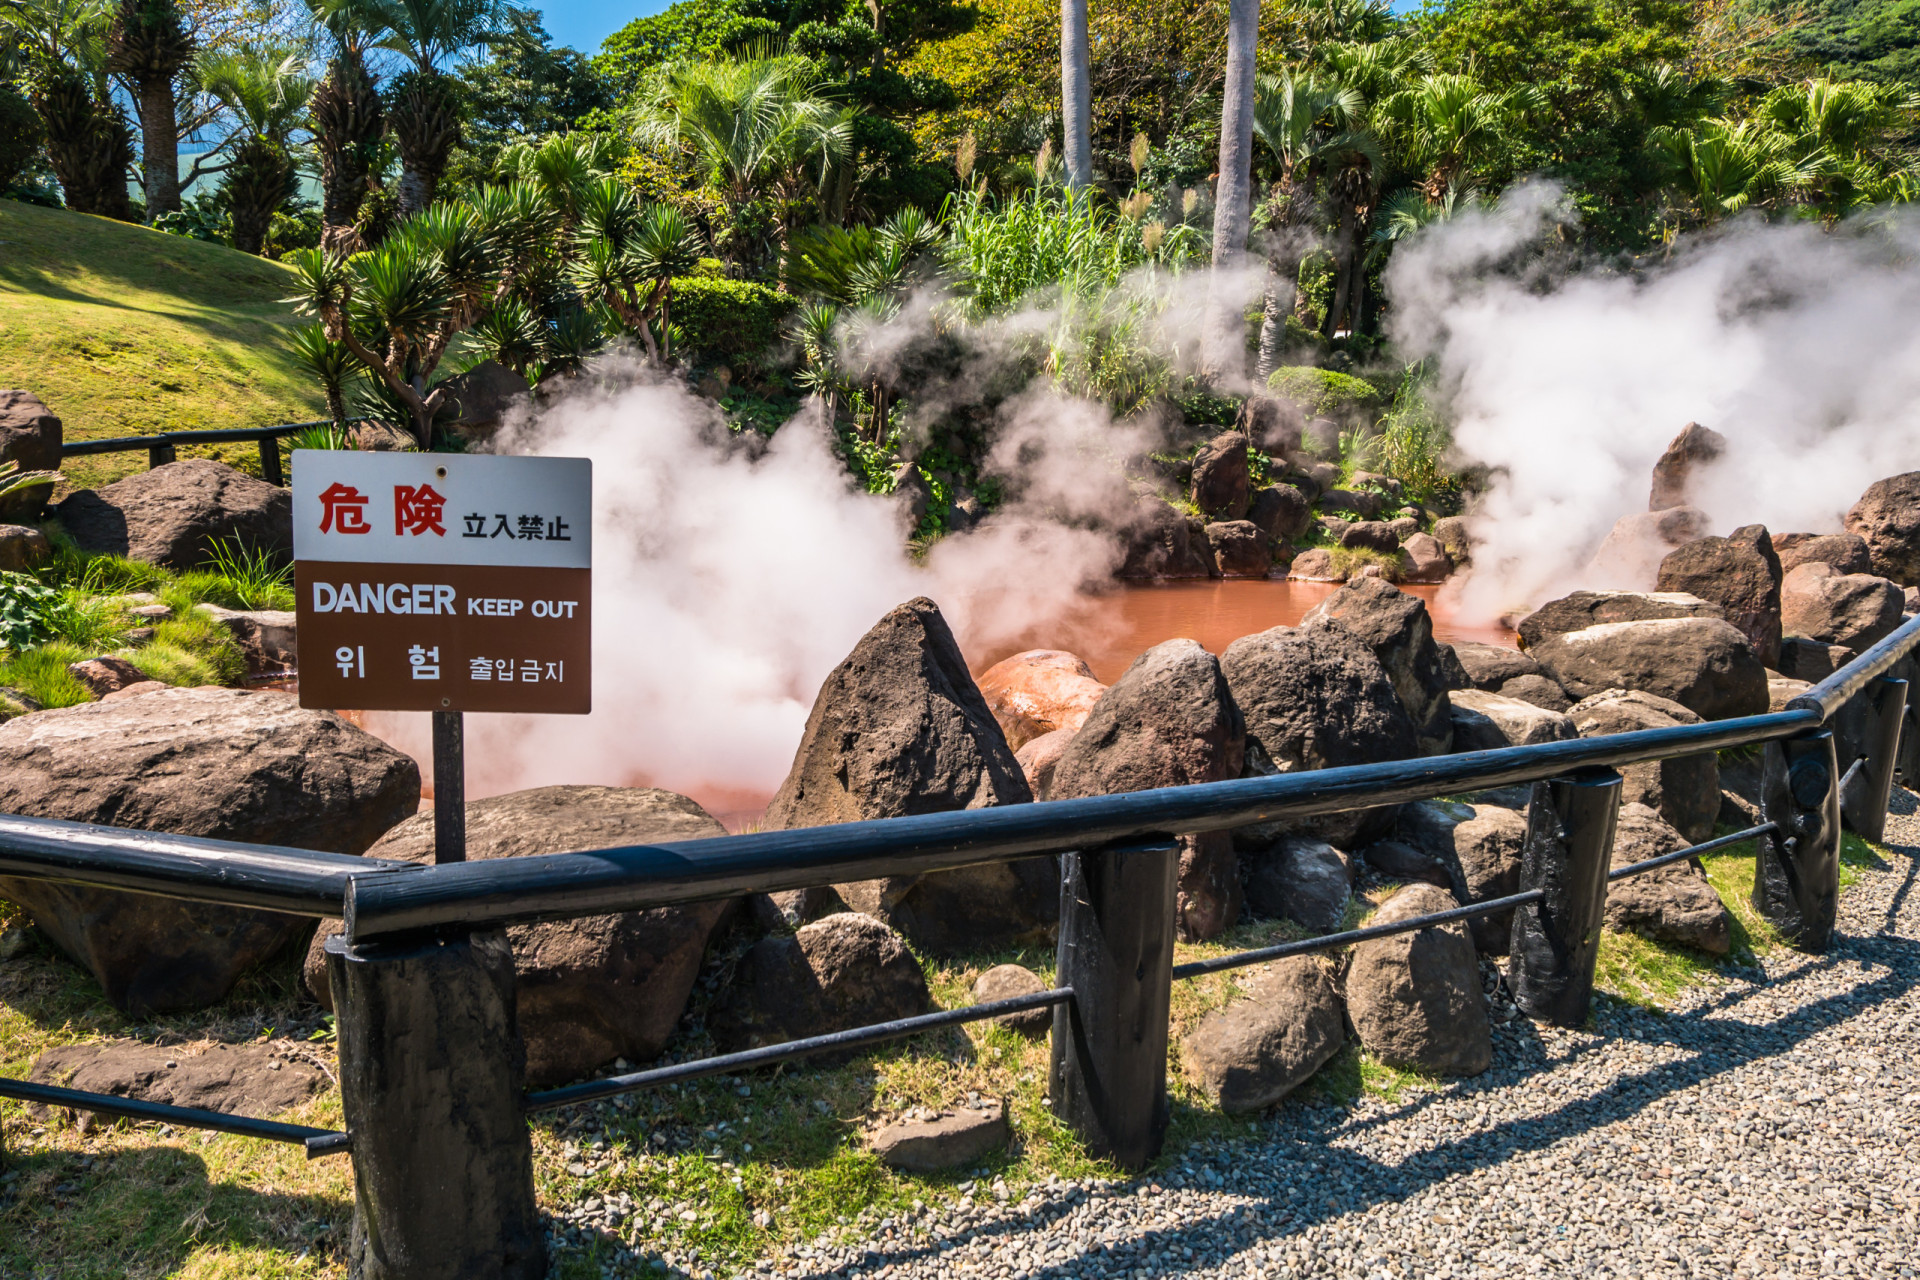 <p>Mentioned in Buddhist texts that date back to 700 CE, Chinoike Jigoku has a collection of sculpted demons around it, some even carved in the rocks. The ancient Buddhist monks sometimes used this bubbling pit to torture prisoners before boiling them alive.</p><p>You may also like:<a href="https://www.starsinsider.com/n/168017?utm_source=msn.com&utm_medium=display&utm_campaign=referral_description&utm_content=588941en-en"> Facts you never knew about Winston Churchill</a></p>